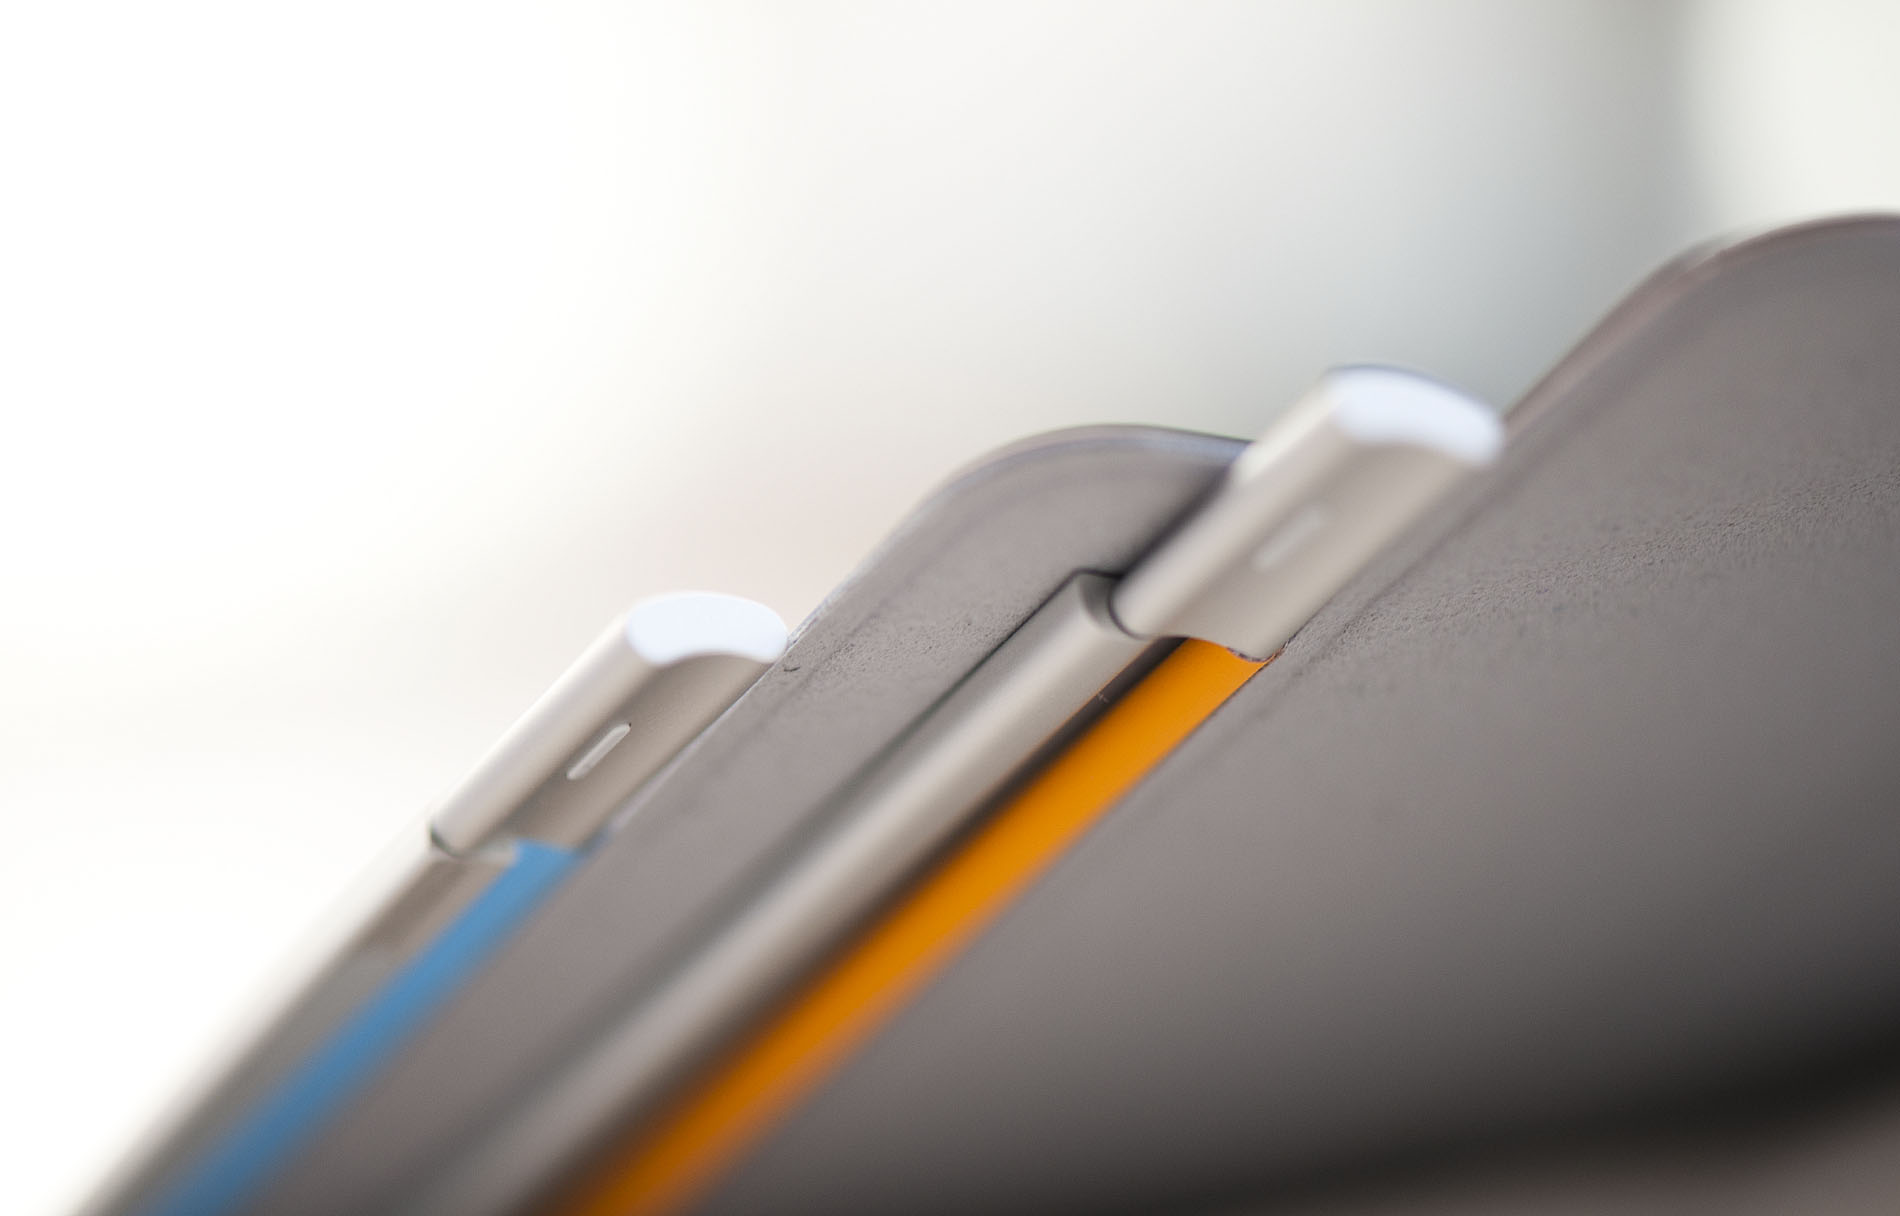 Apple's foray into iPad cases - Smart Covers - The Apple iPad 2 Review